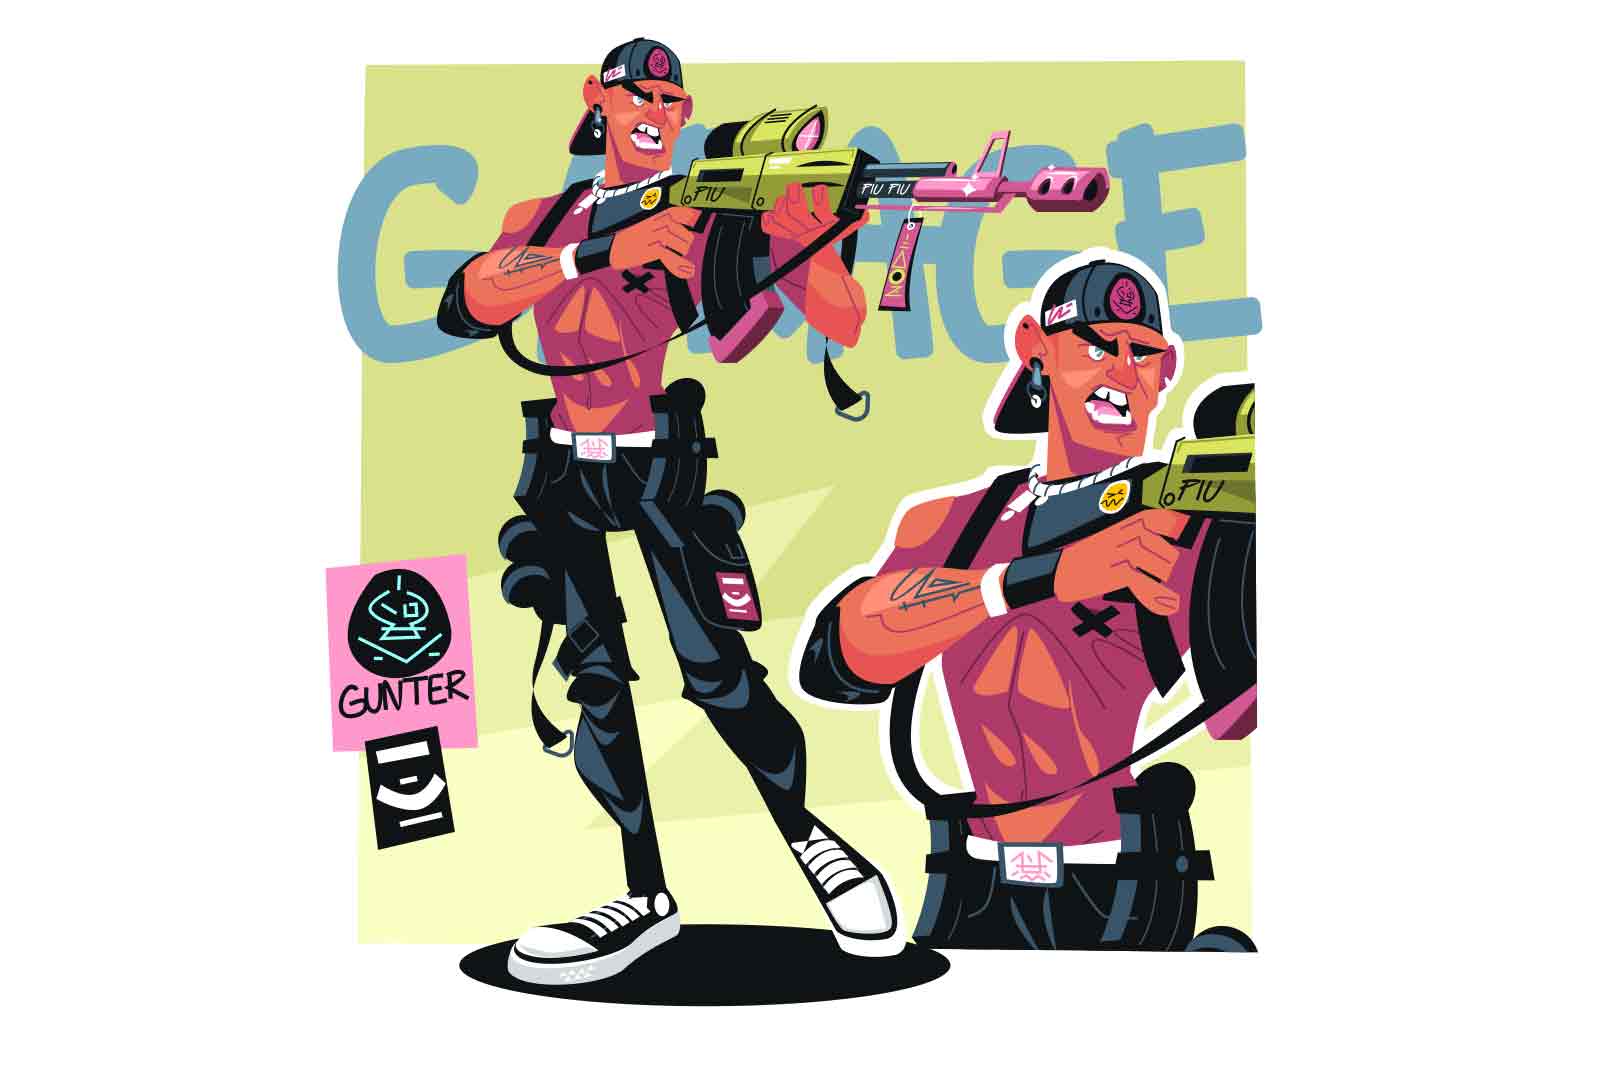 Aggressive gangster with machine gun in hands took aim, vector illustration.